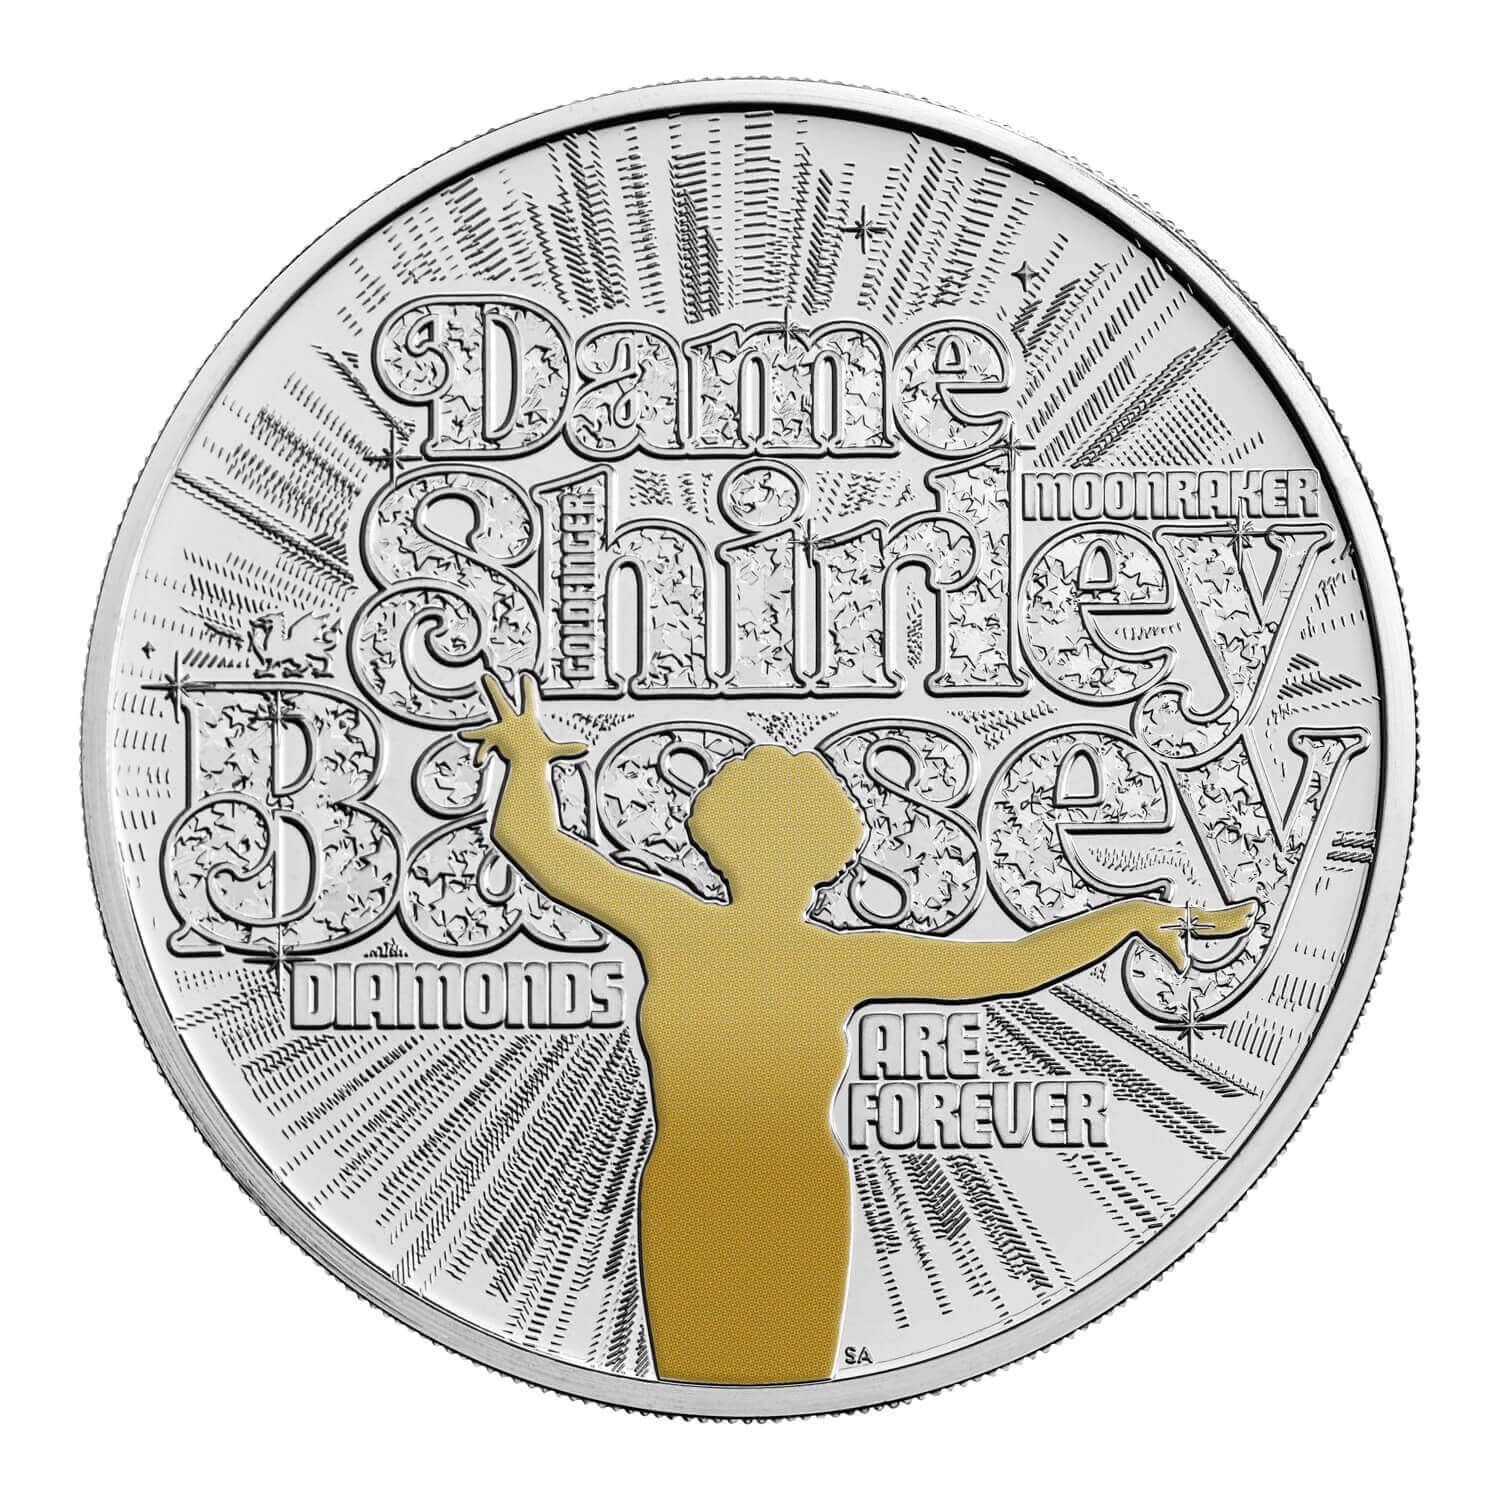 Shirley Bassey Immortalized On UK Coin | Mintage | Worth | Buy Now